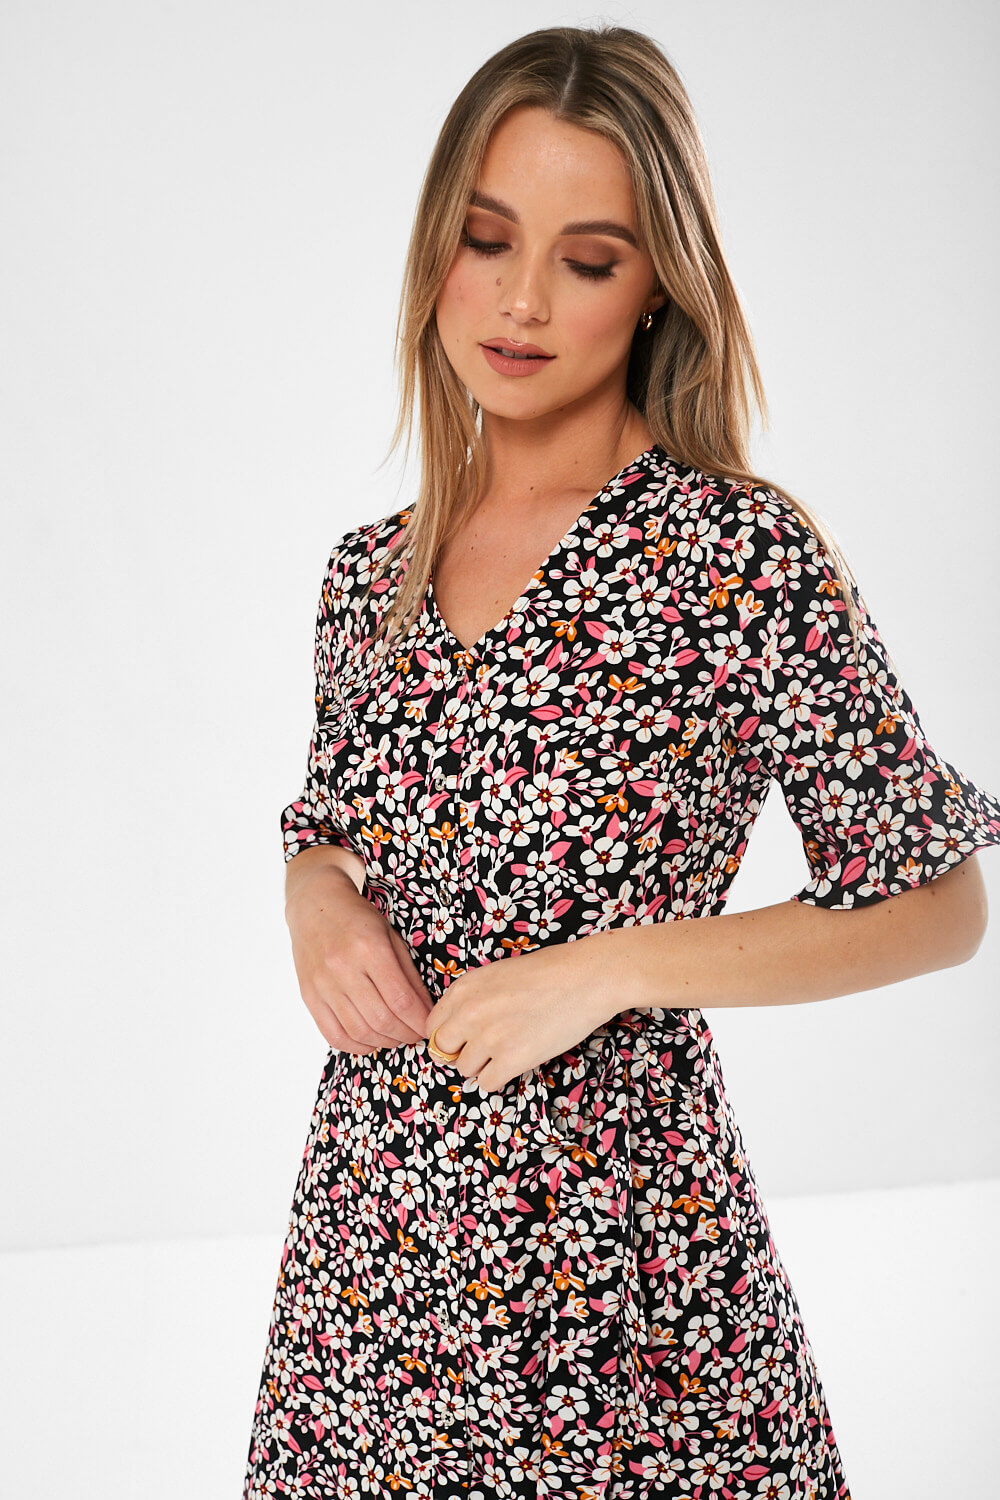 Marc Angelo Floral Shirt Dress in Black | iCLOTHING - iCLOTHING